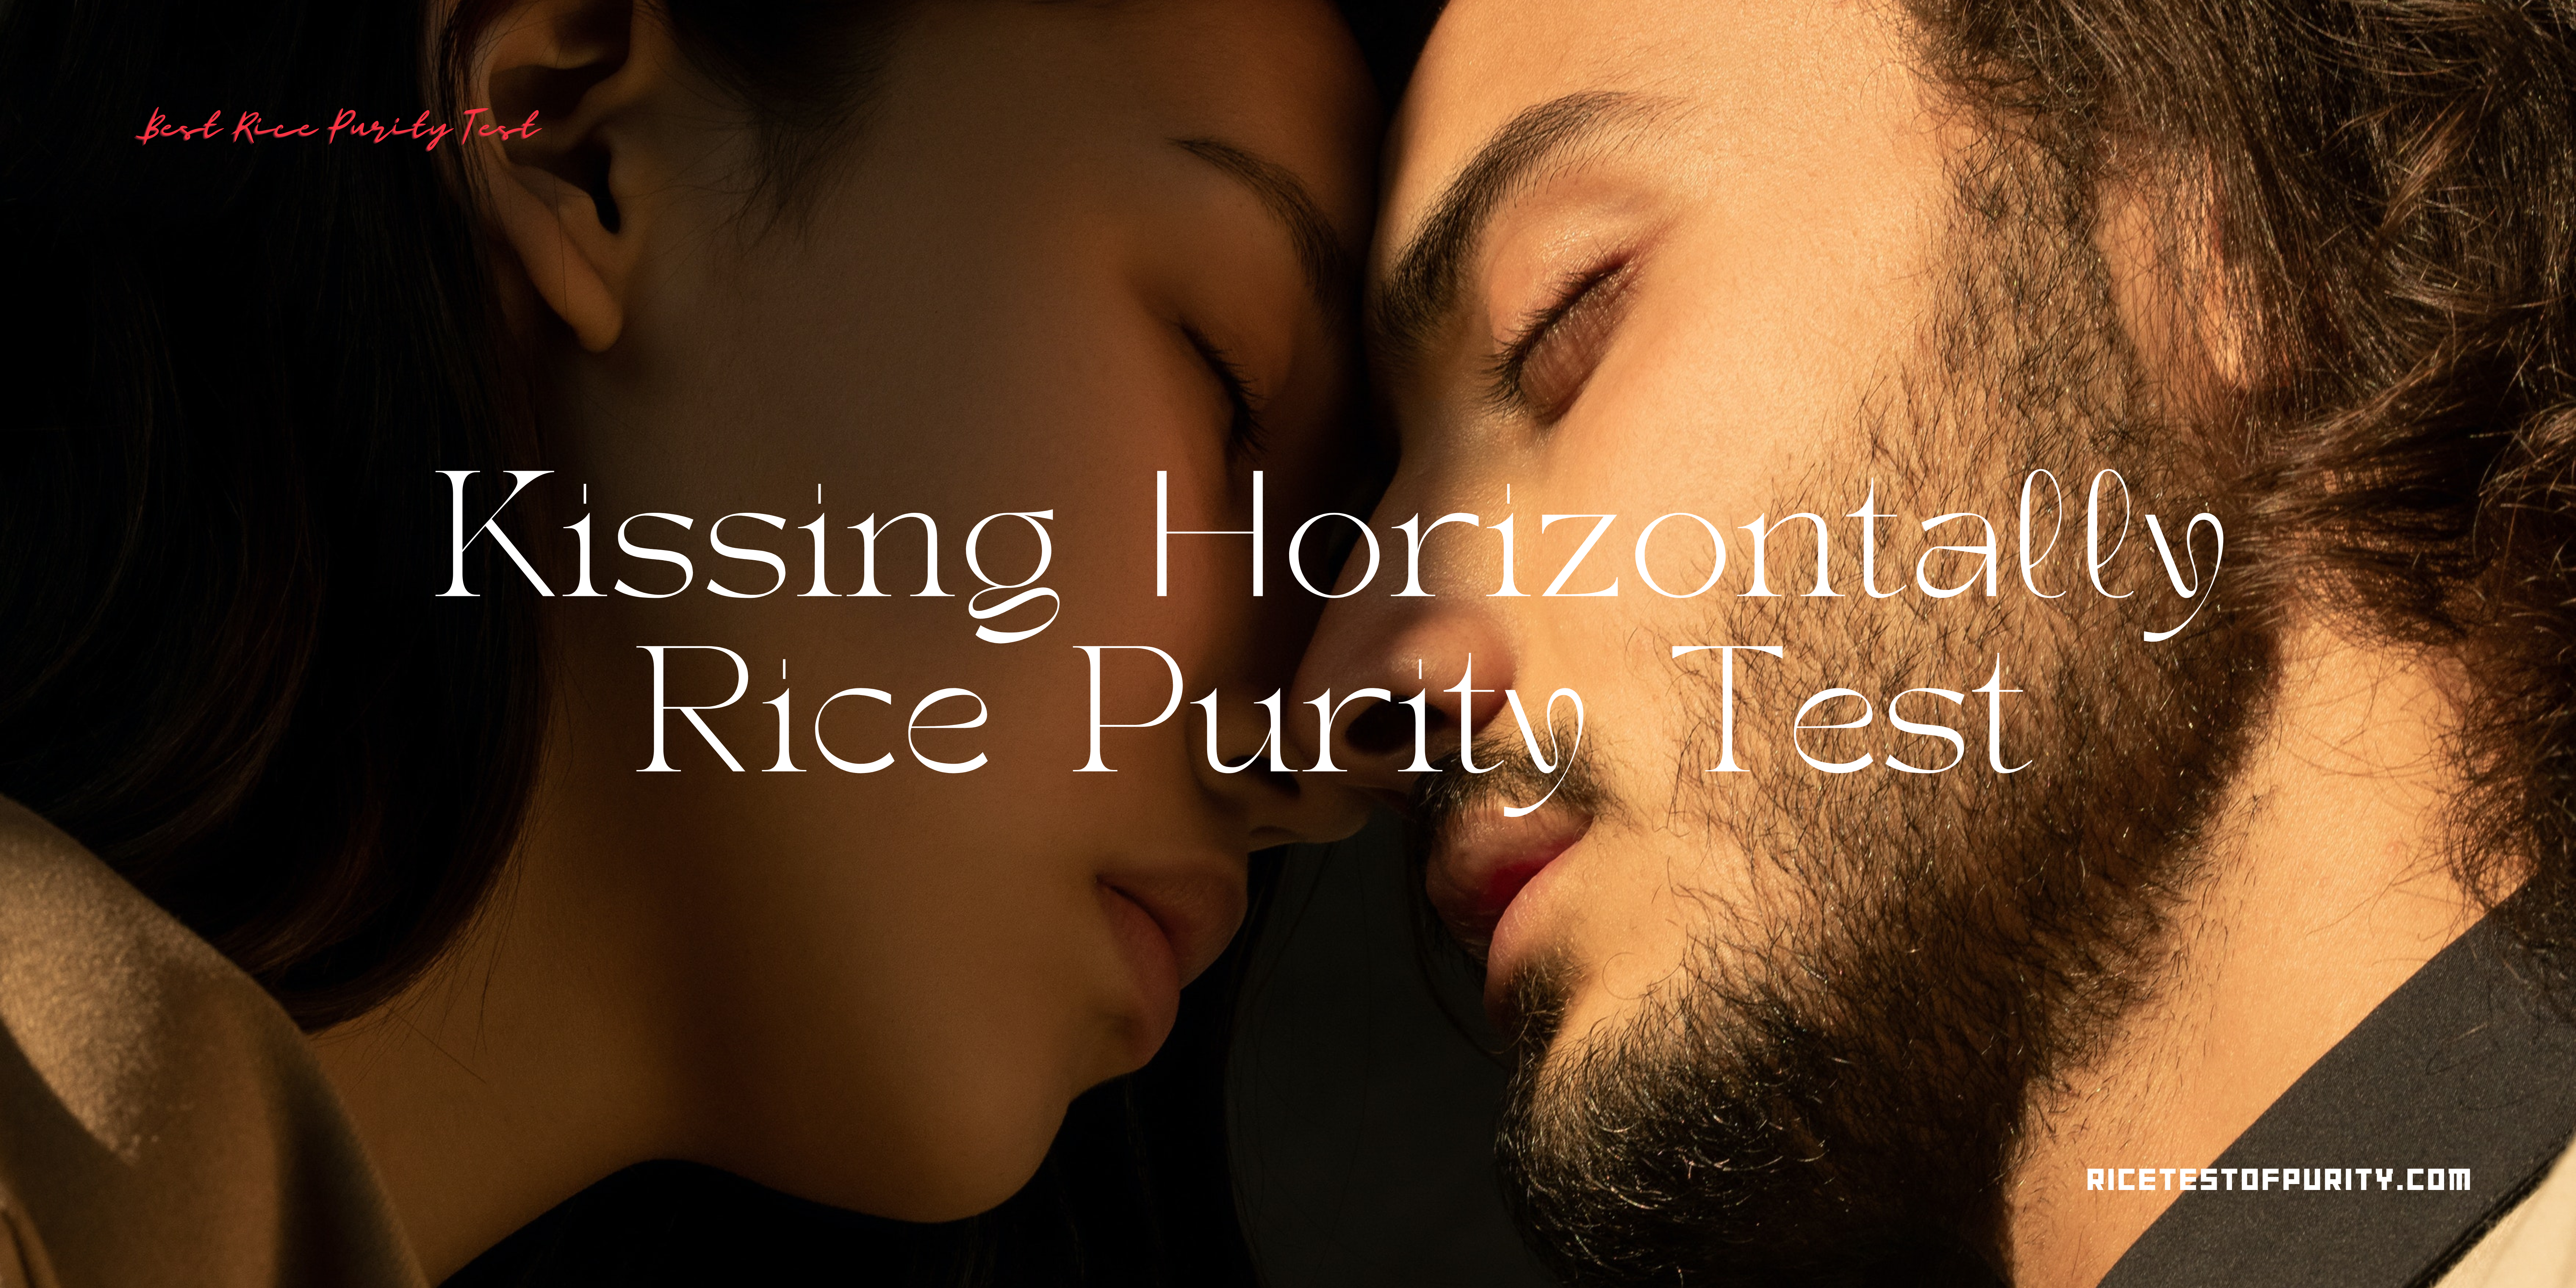 Unveiling the Kissing Horizontally Rice Purity Test